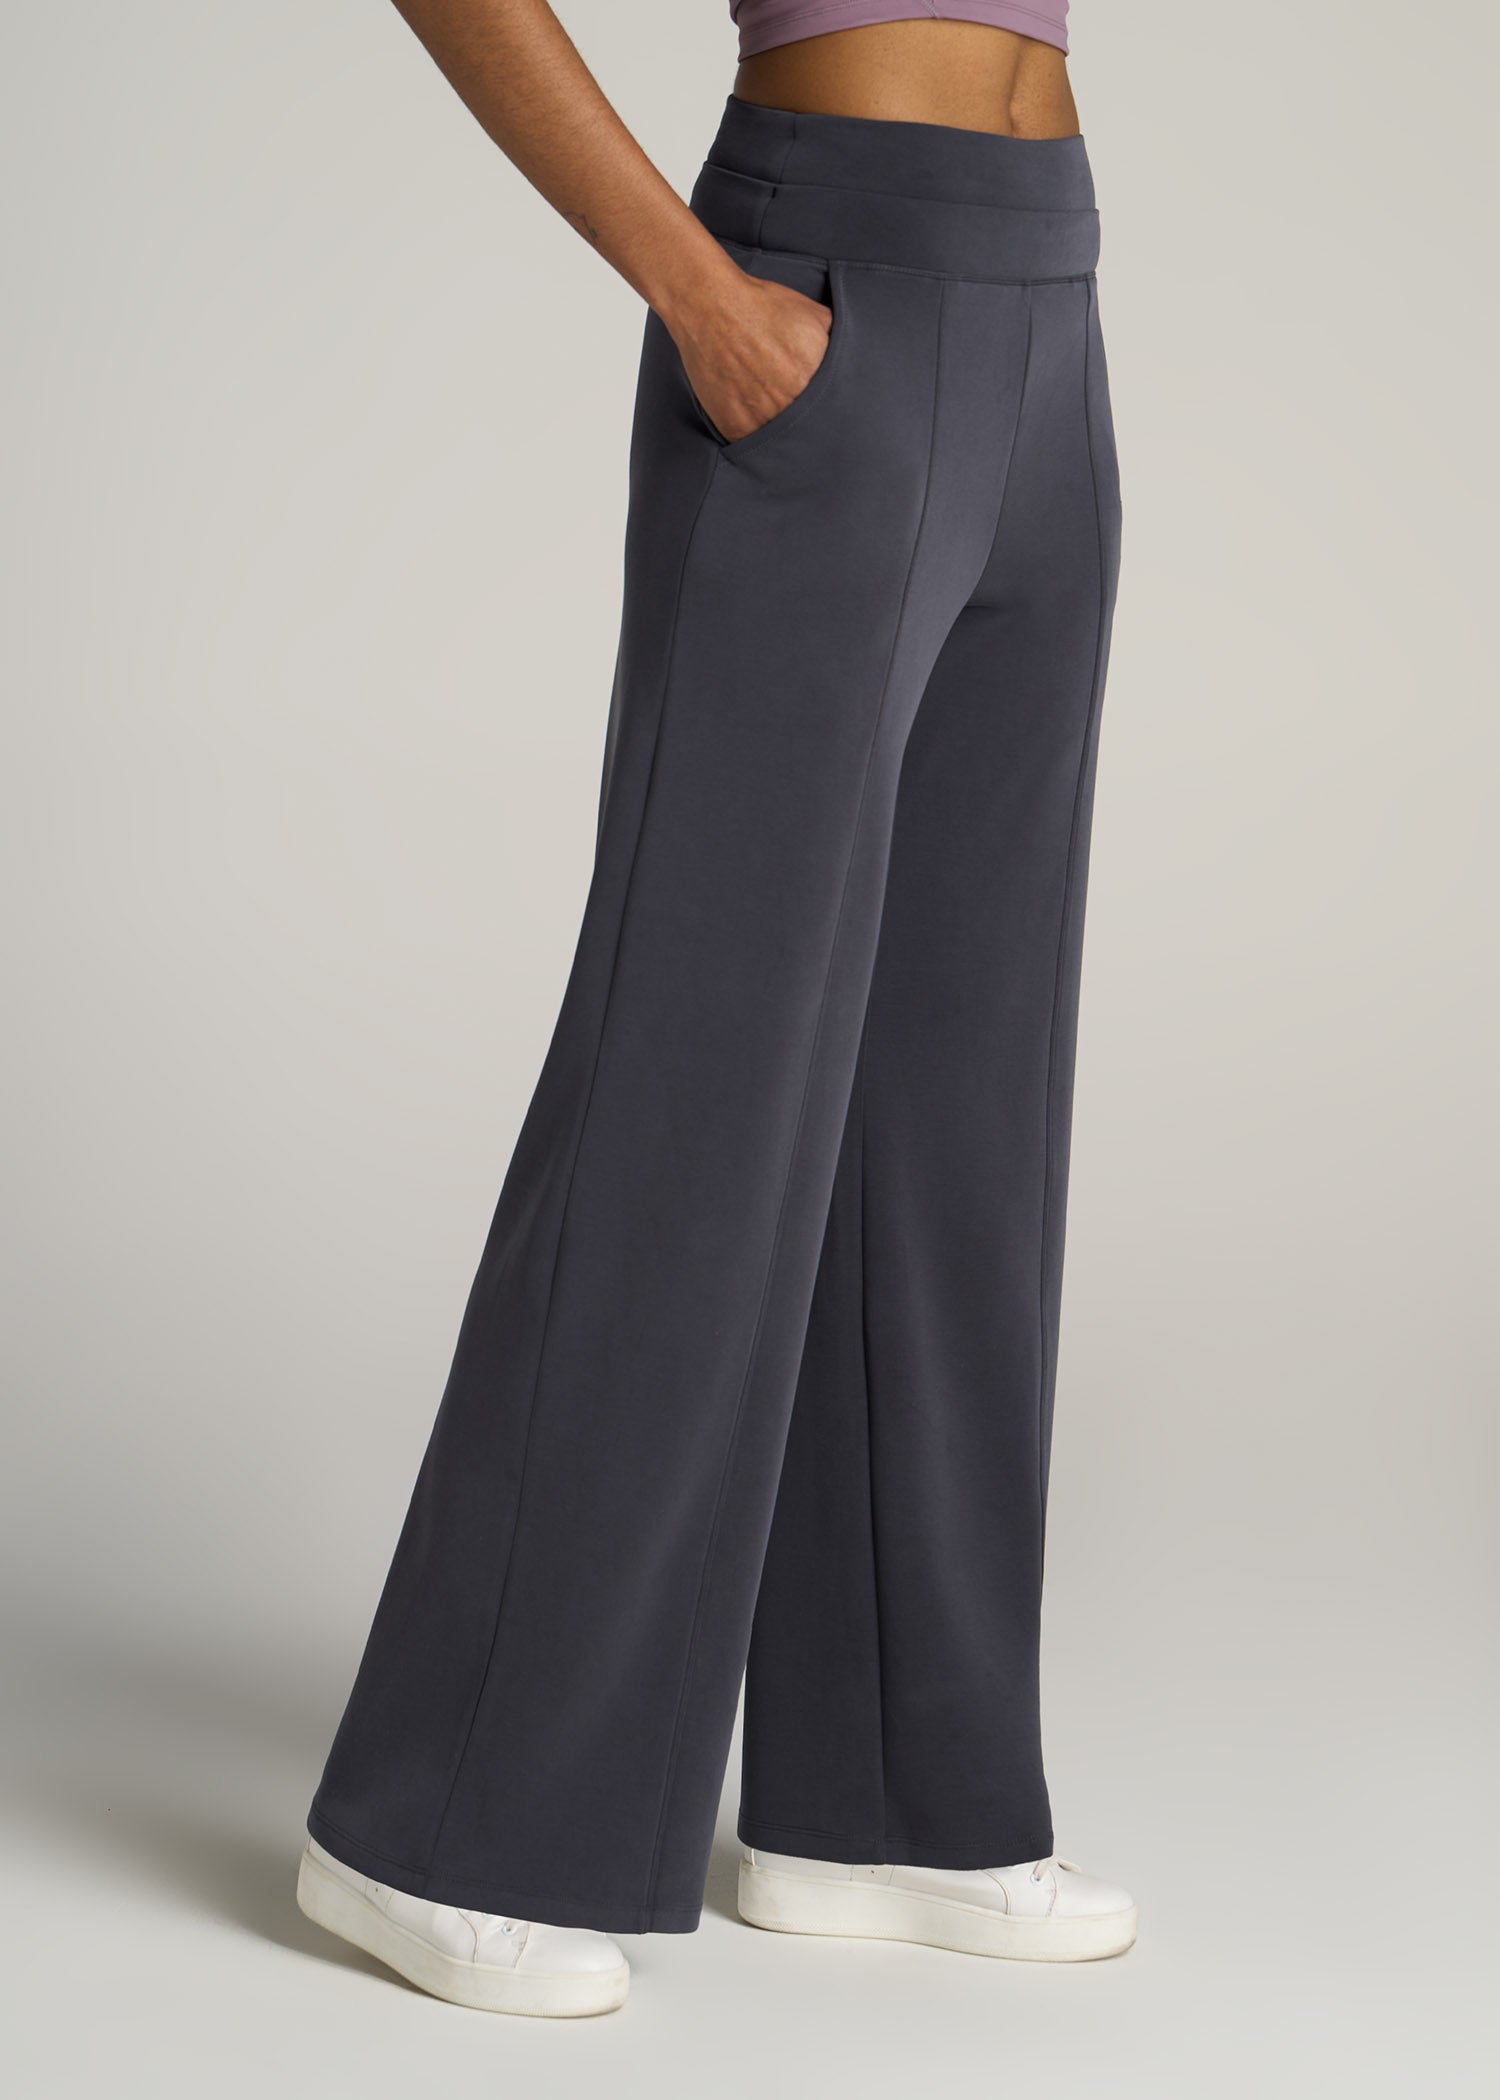 NEW Women with Control Tall Hollywood Waist Pants with Seam Detail CHARCOAL  XLT